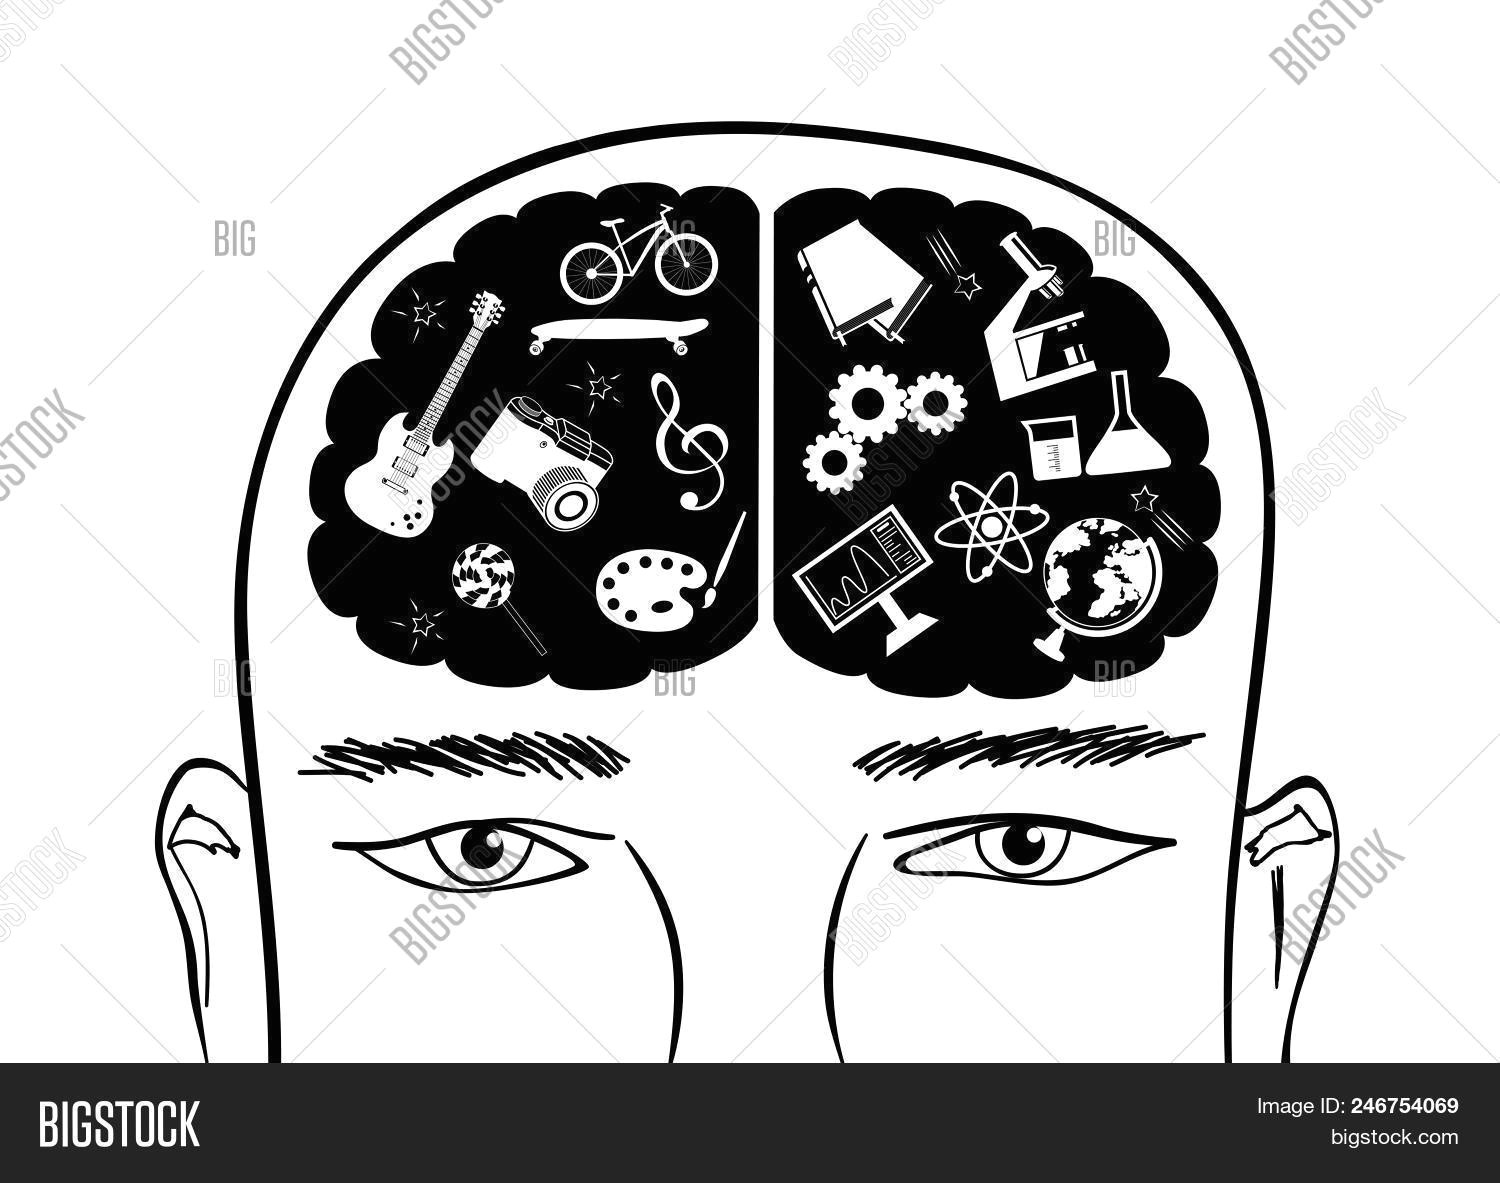 hand drawn head of man with right and left cerebral hemispheres of brain abstract concept